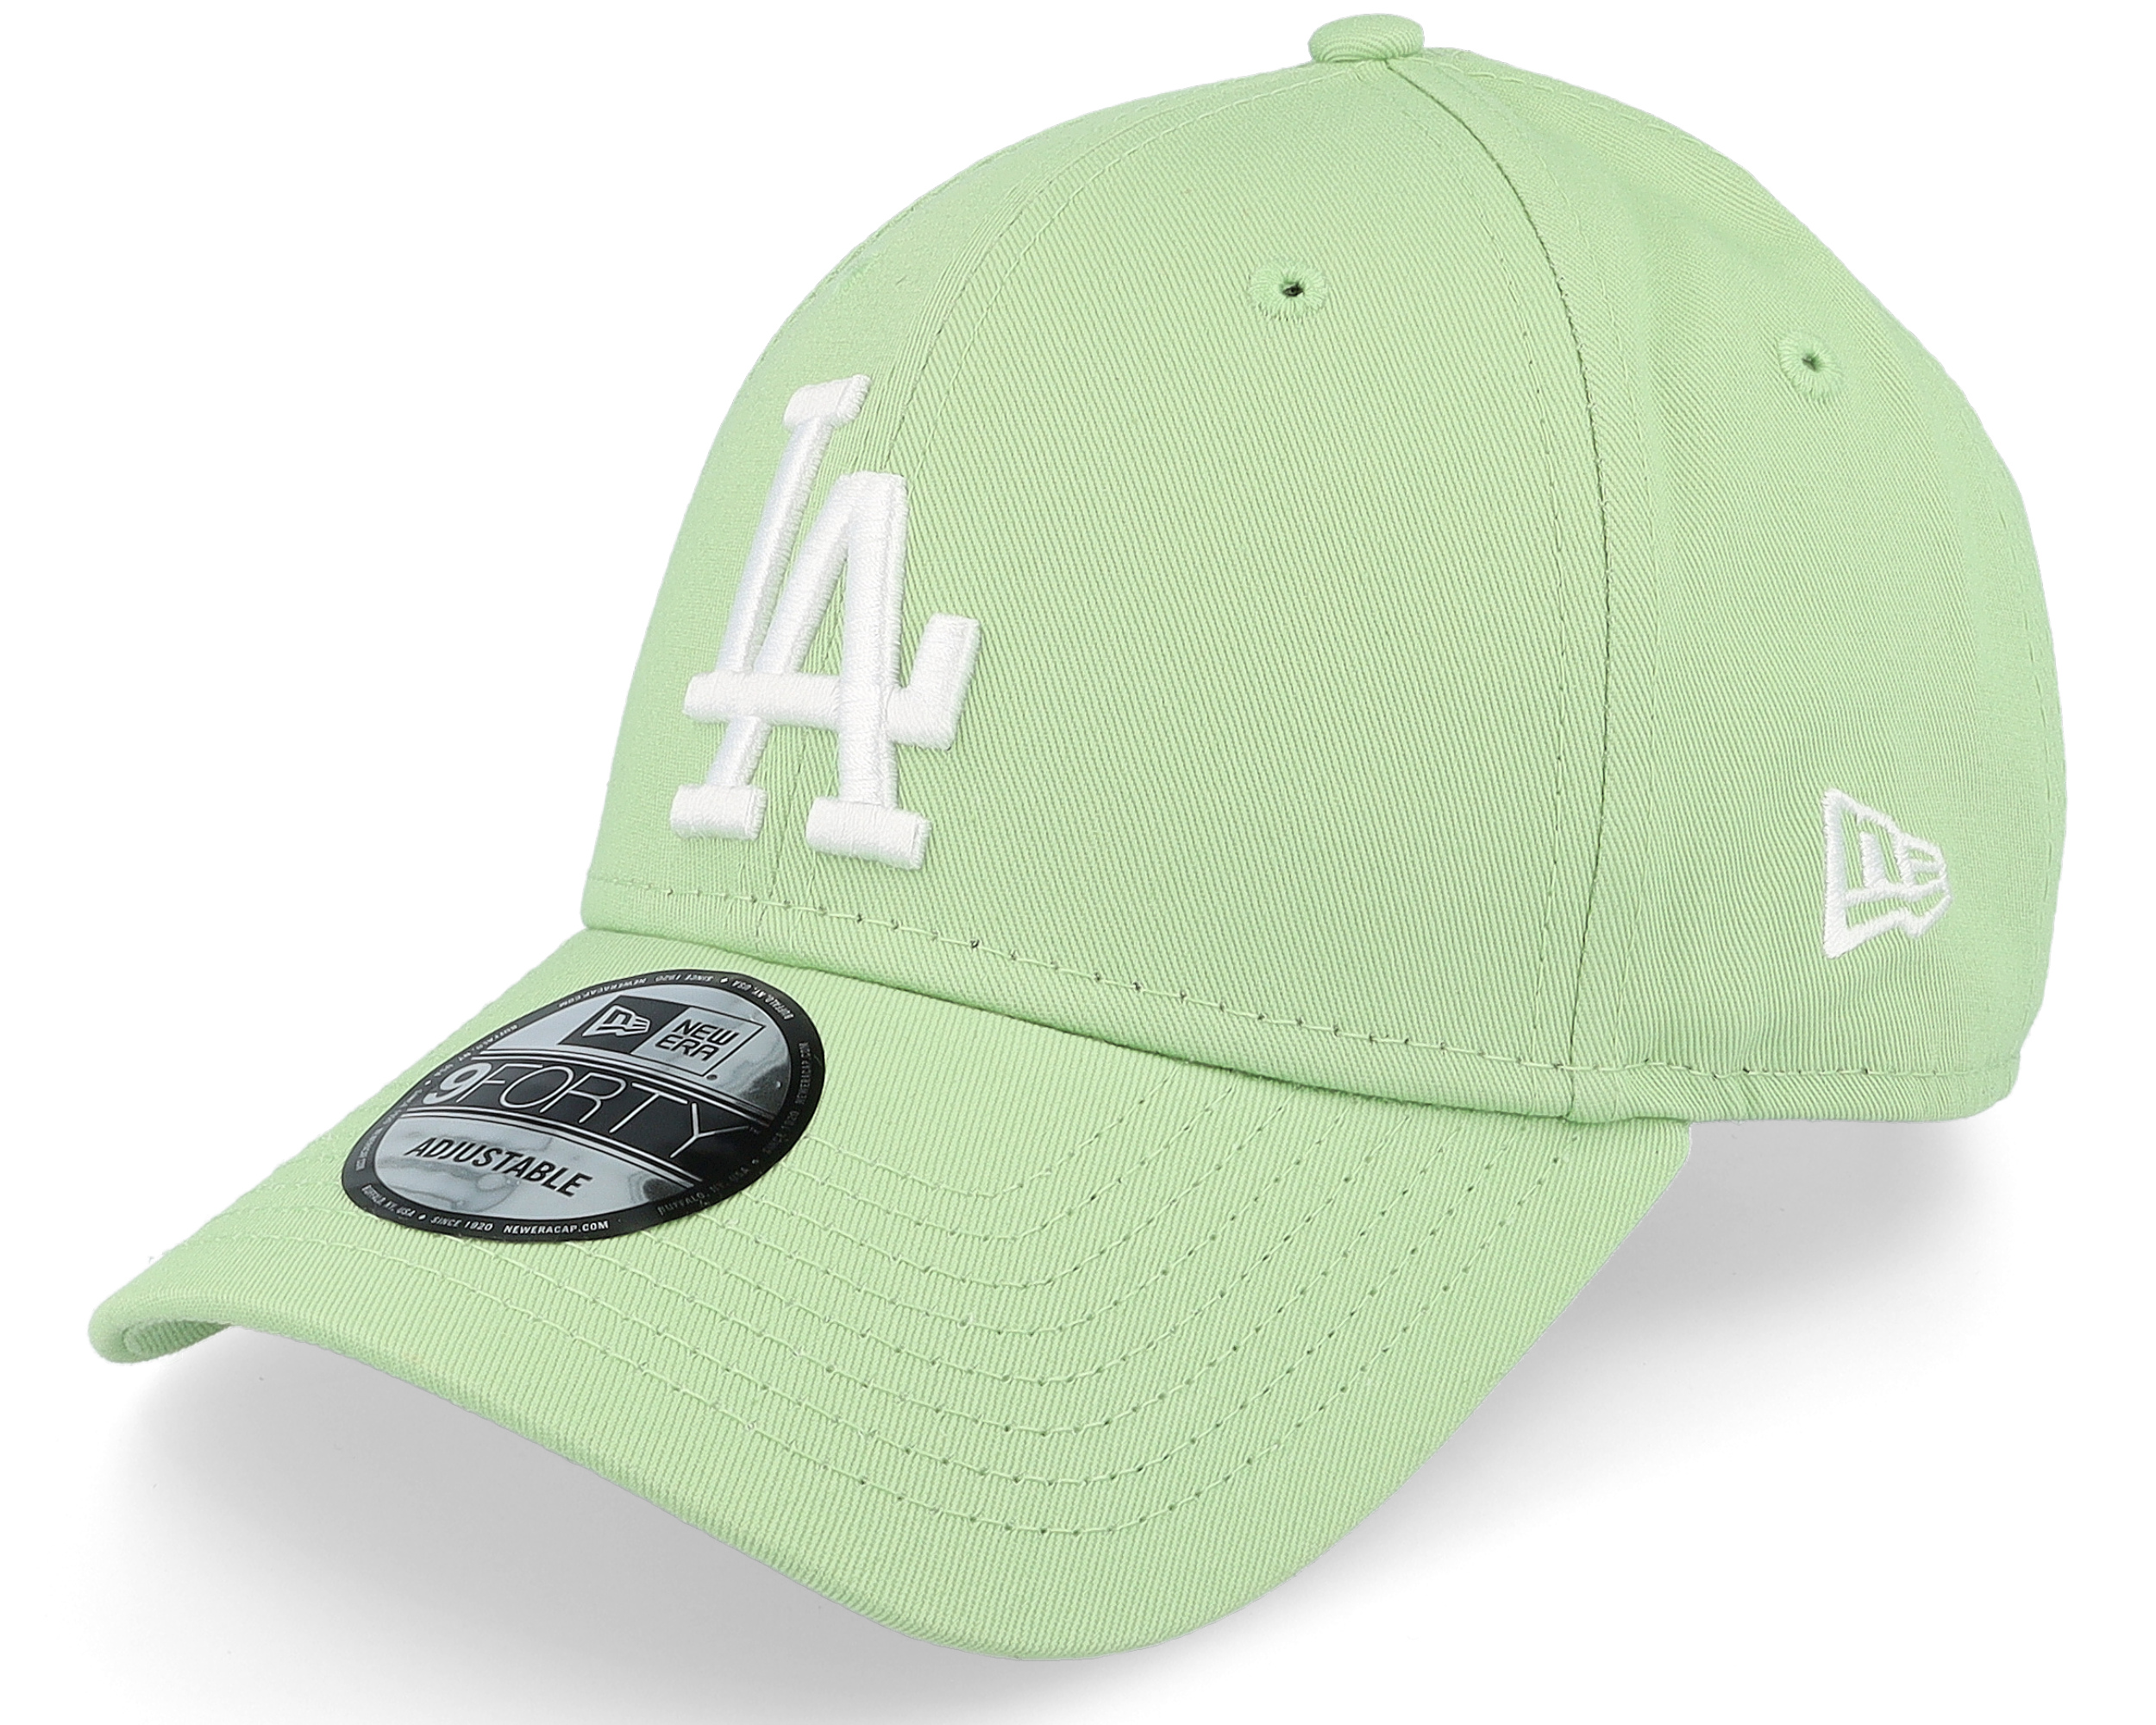 Los Angeles Dodgers League Essential 9FORTY Green/White Adjustable - New Era